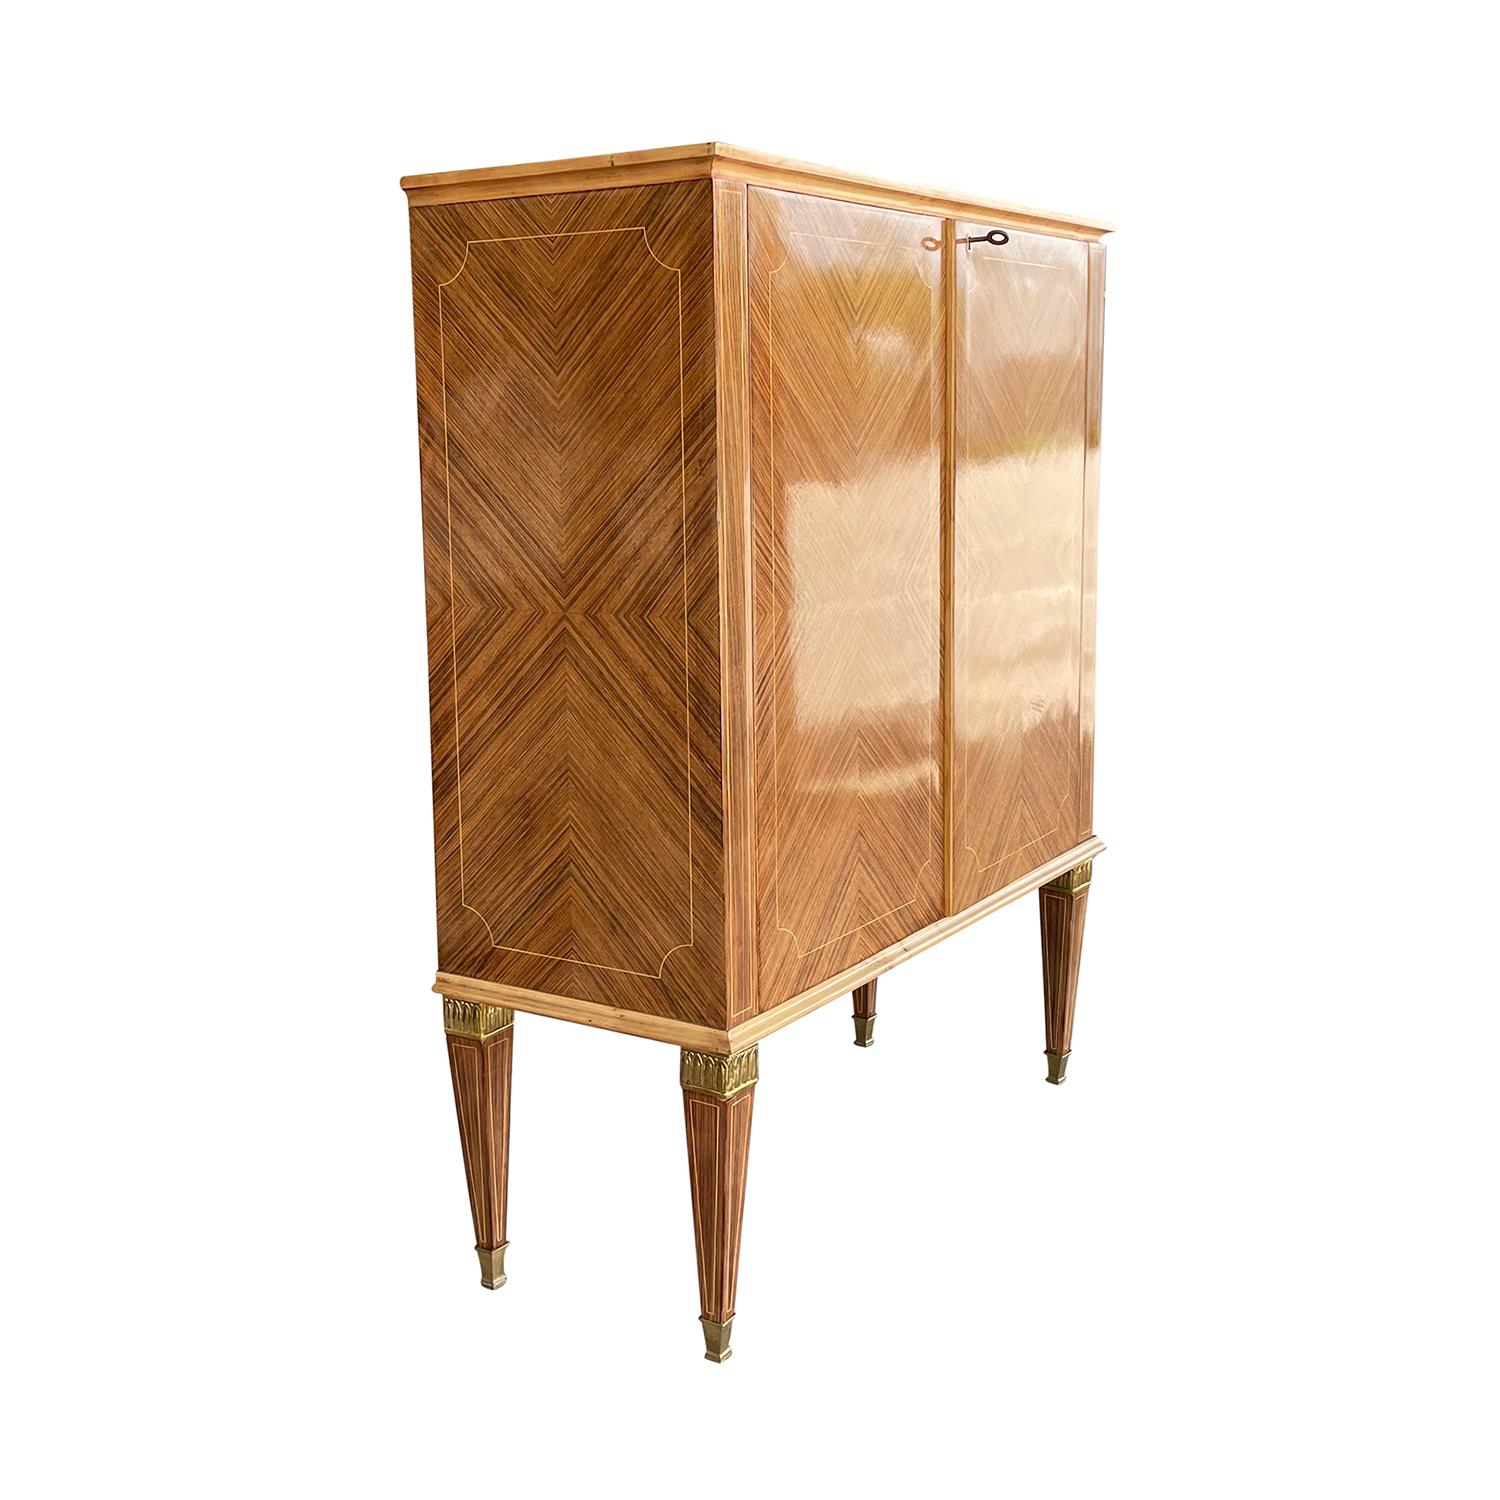 A light-brown, vintage Mid-Century Modern Italian cabinet made of hand carved polished Walnut with two doors and two shelves, designed by Paolo Buffa in good condition. The small cupboard features its original brass hardware and keys with four